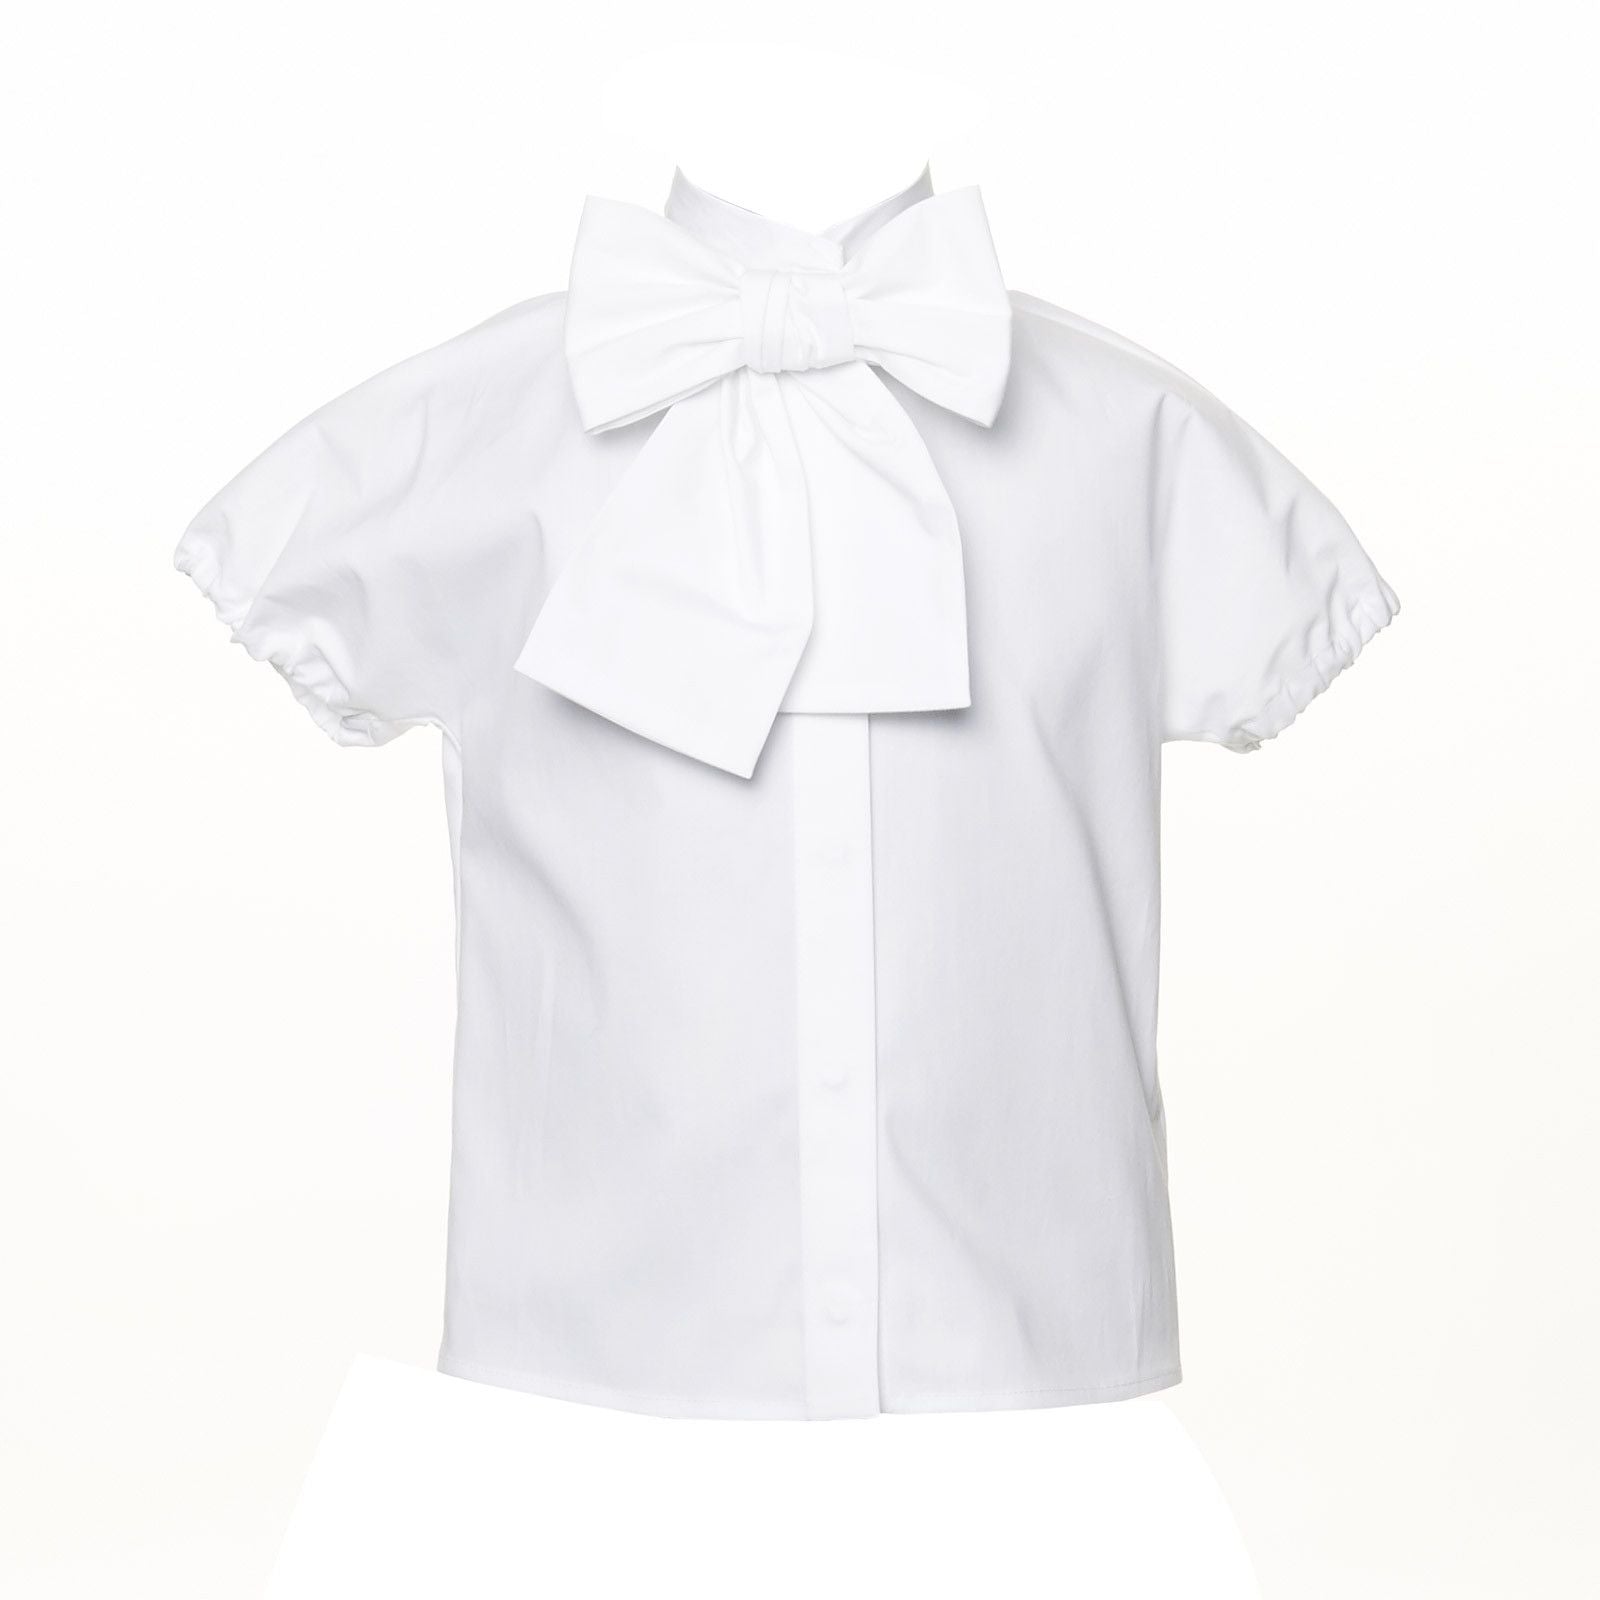 Girls Ivory Short Sleeve Blouse With Bow Trims - CÉMAROSE | Children's Fashion Store - 1